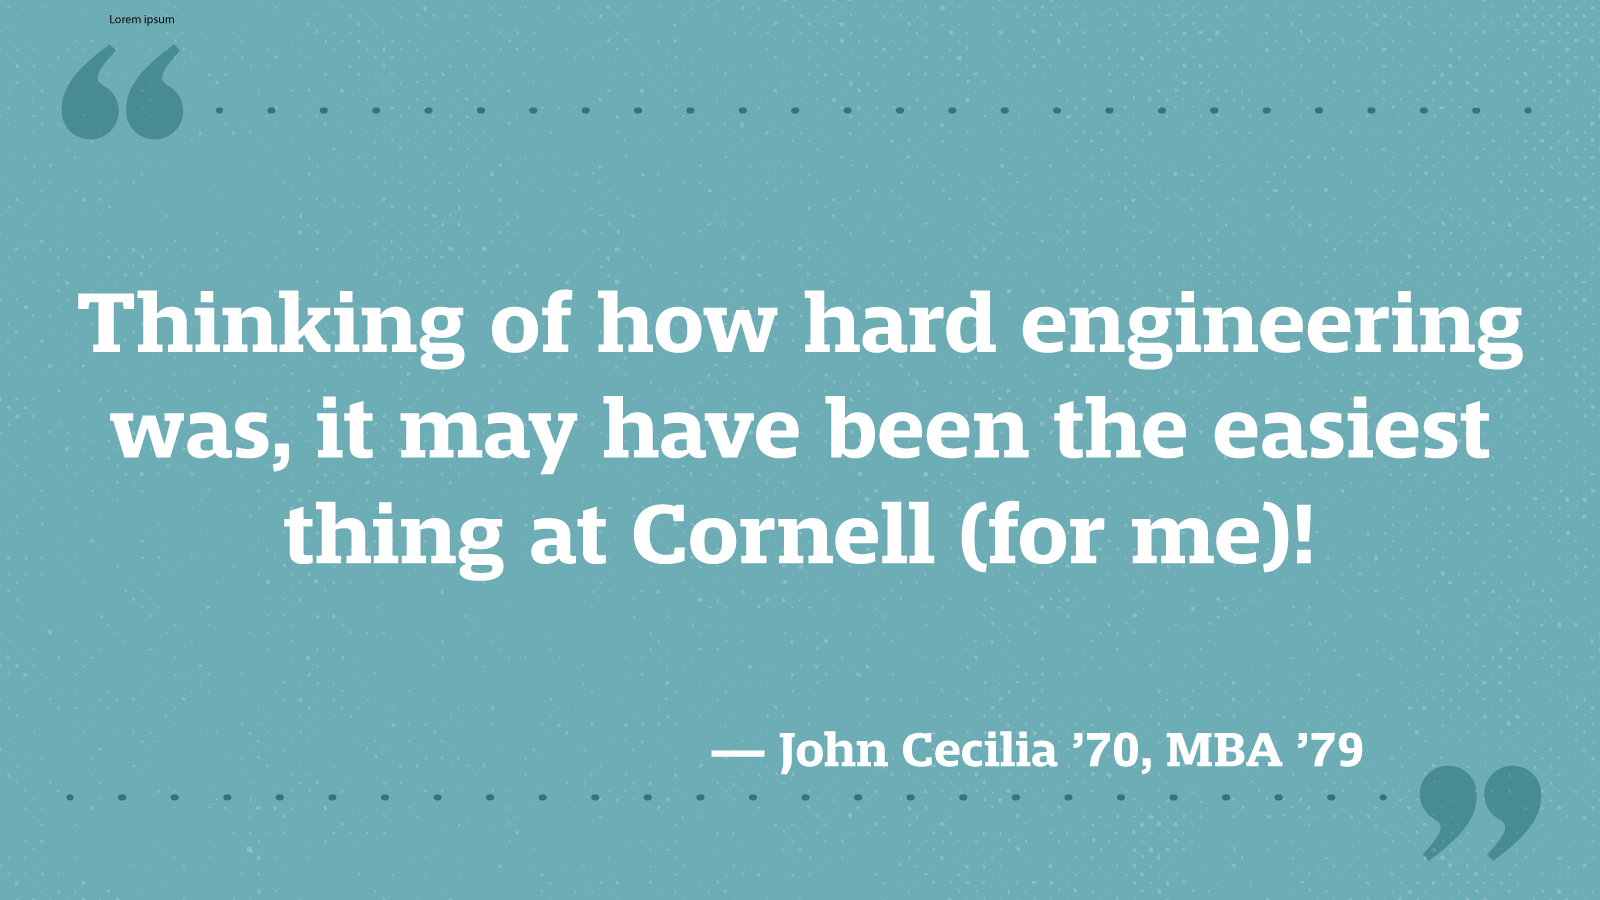 Thinking of how hard engineering was, it may have been the easiest thing at Cornell (for me)! — John Cecilia ’70, MBA ’79